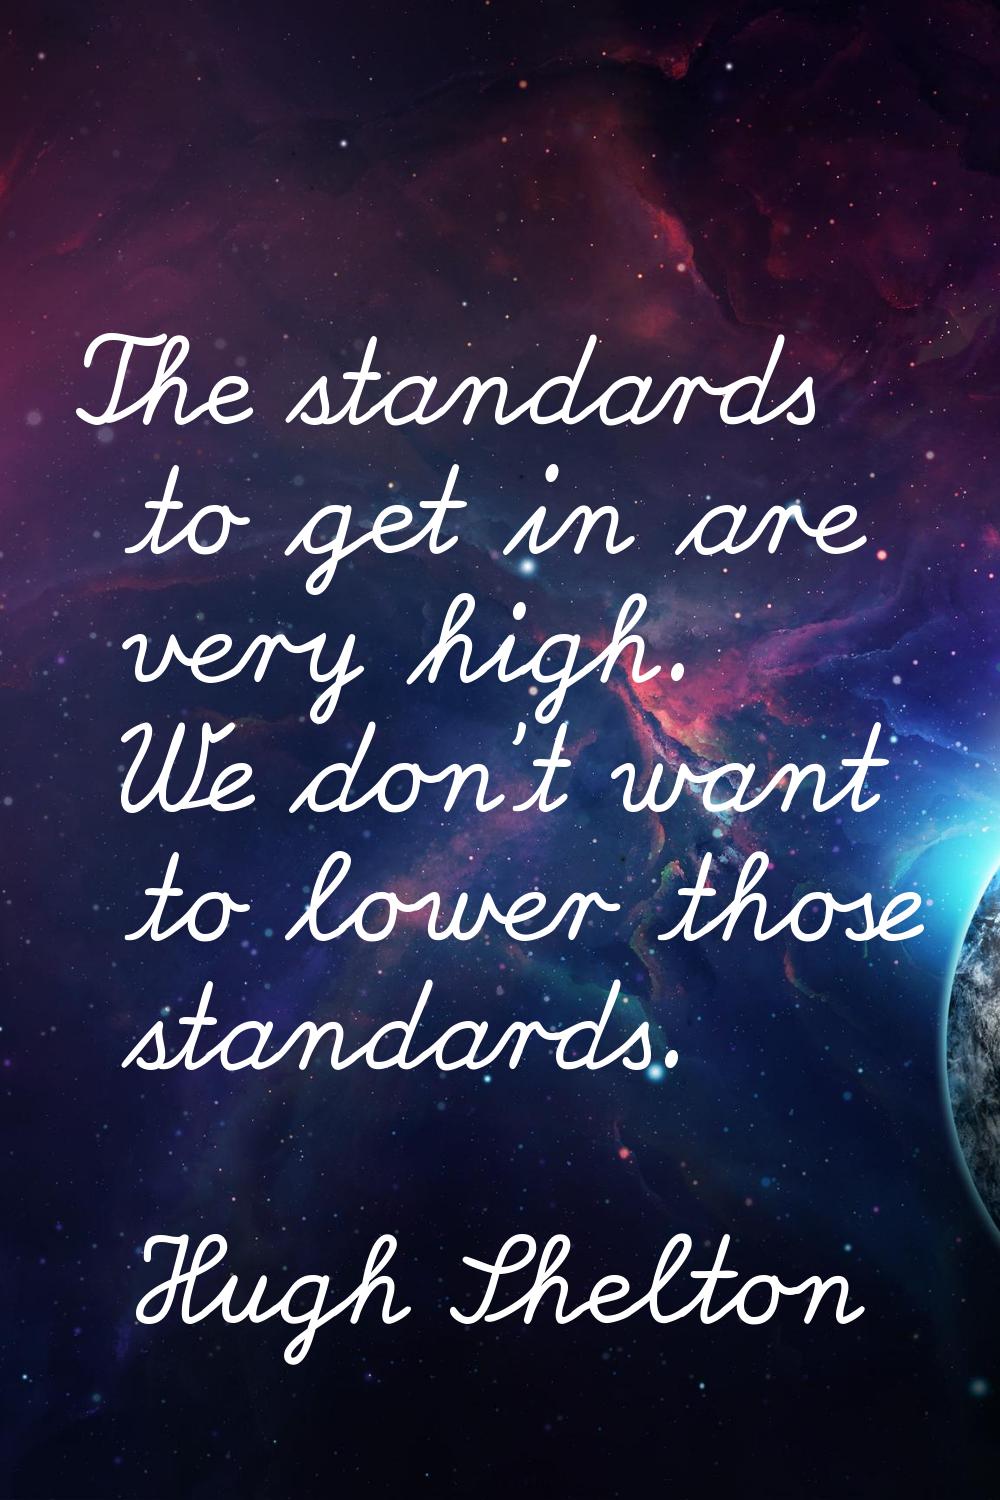 The standards to get in are very high. We don't want to lower those standards.